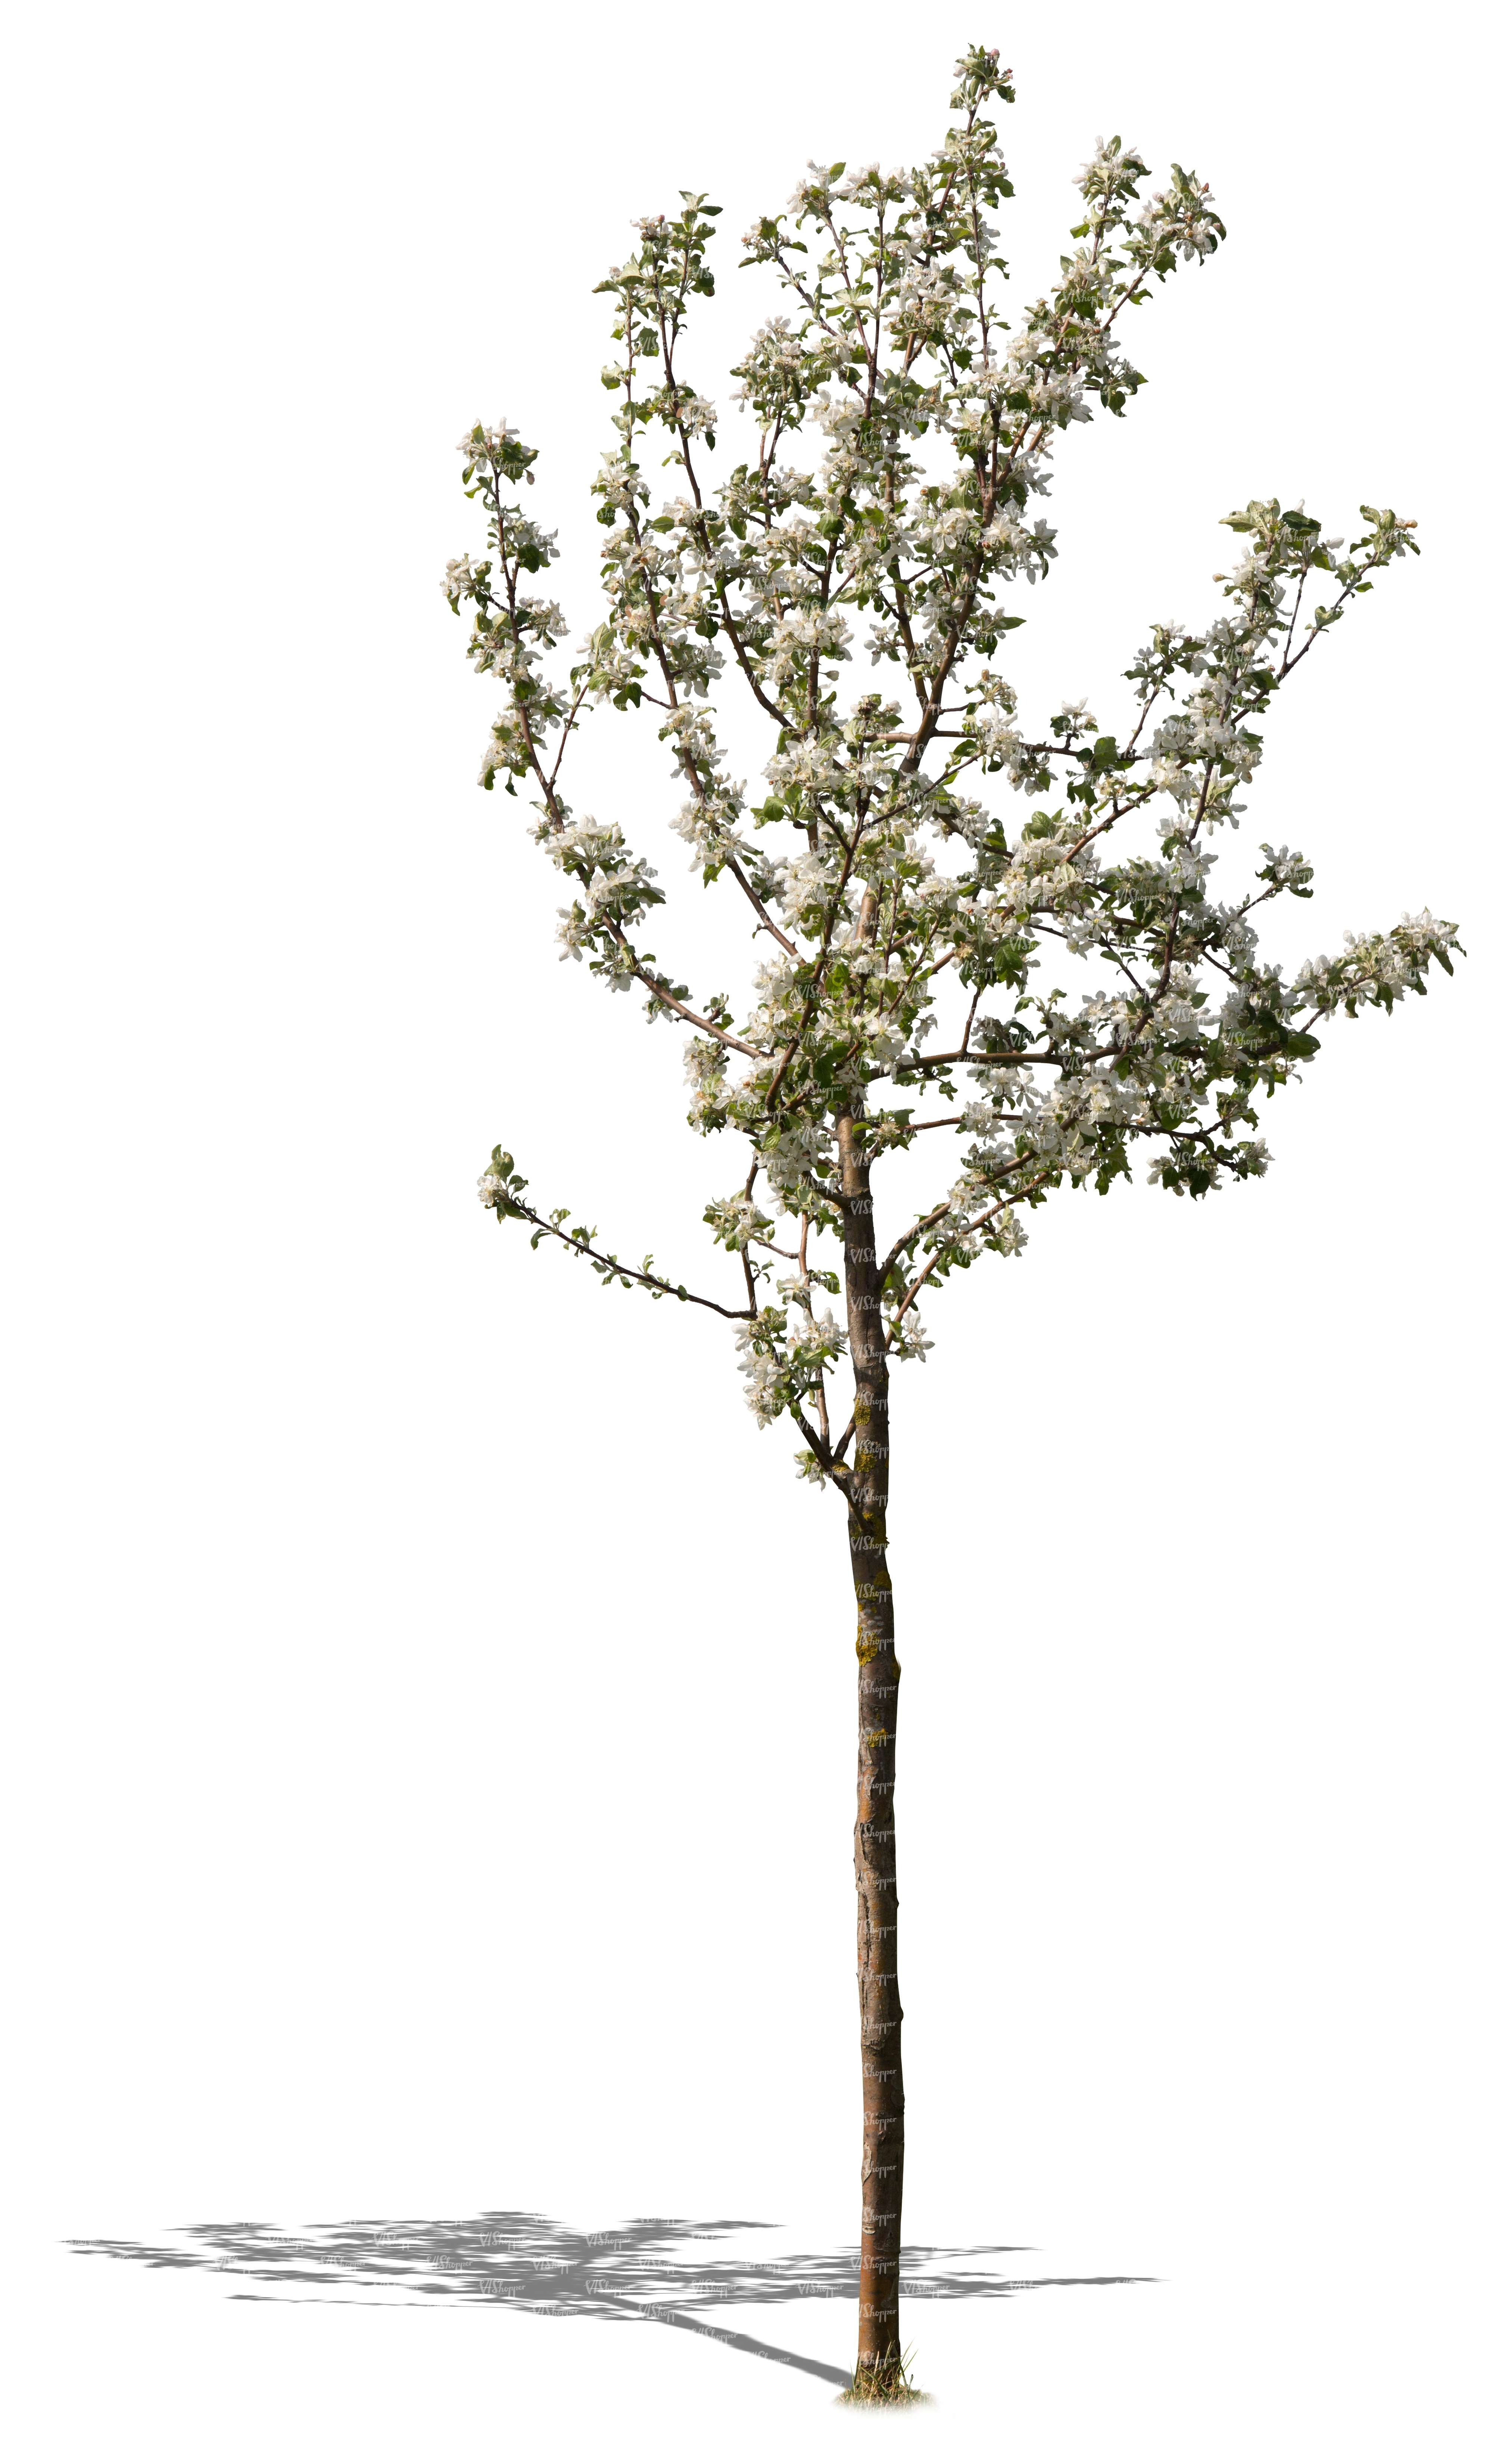 small tree full of blossoms - cut out trees and plants - VIShopper